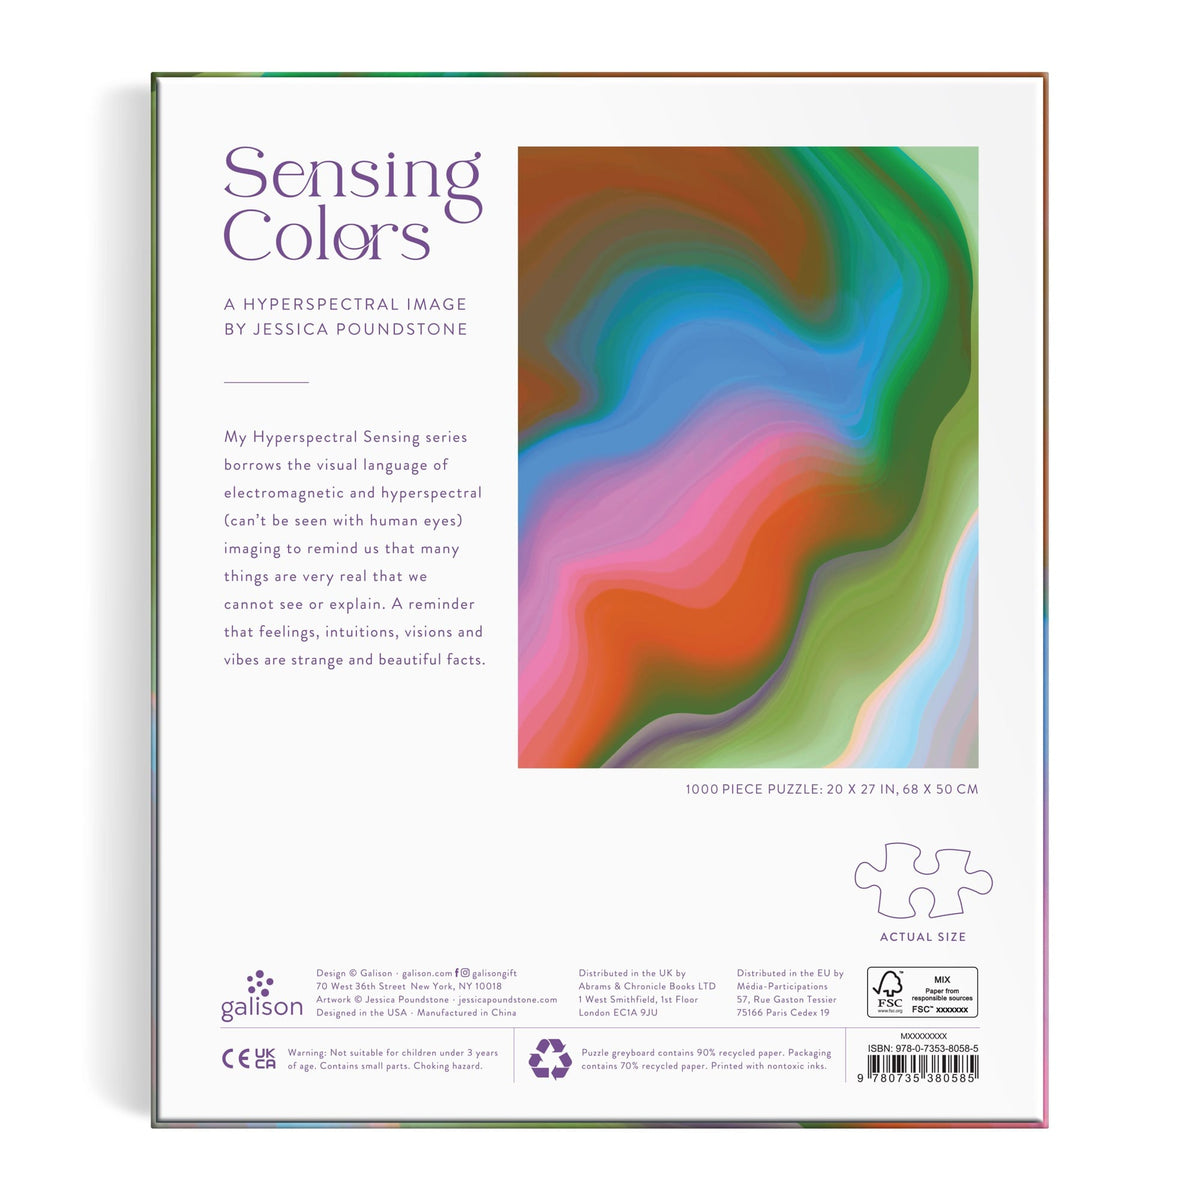 Sensing Colors by Jessica Poundstone 1000 Piece Puzzle 1000 Piece Puzzles Jessica Poundstone 